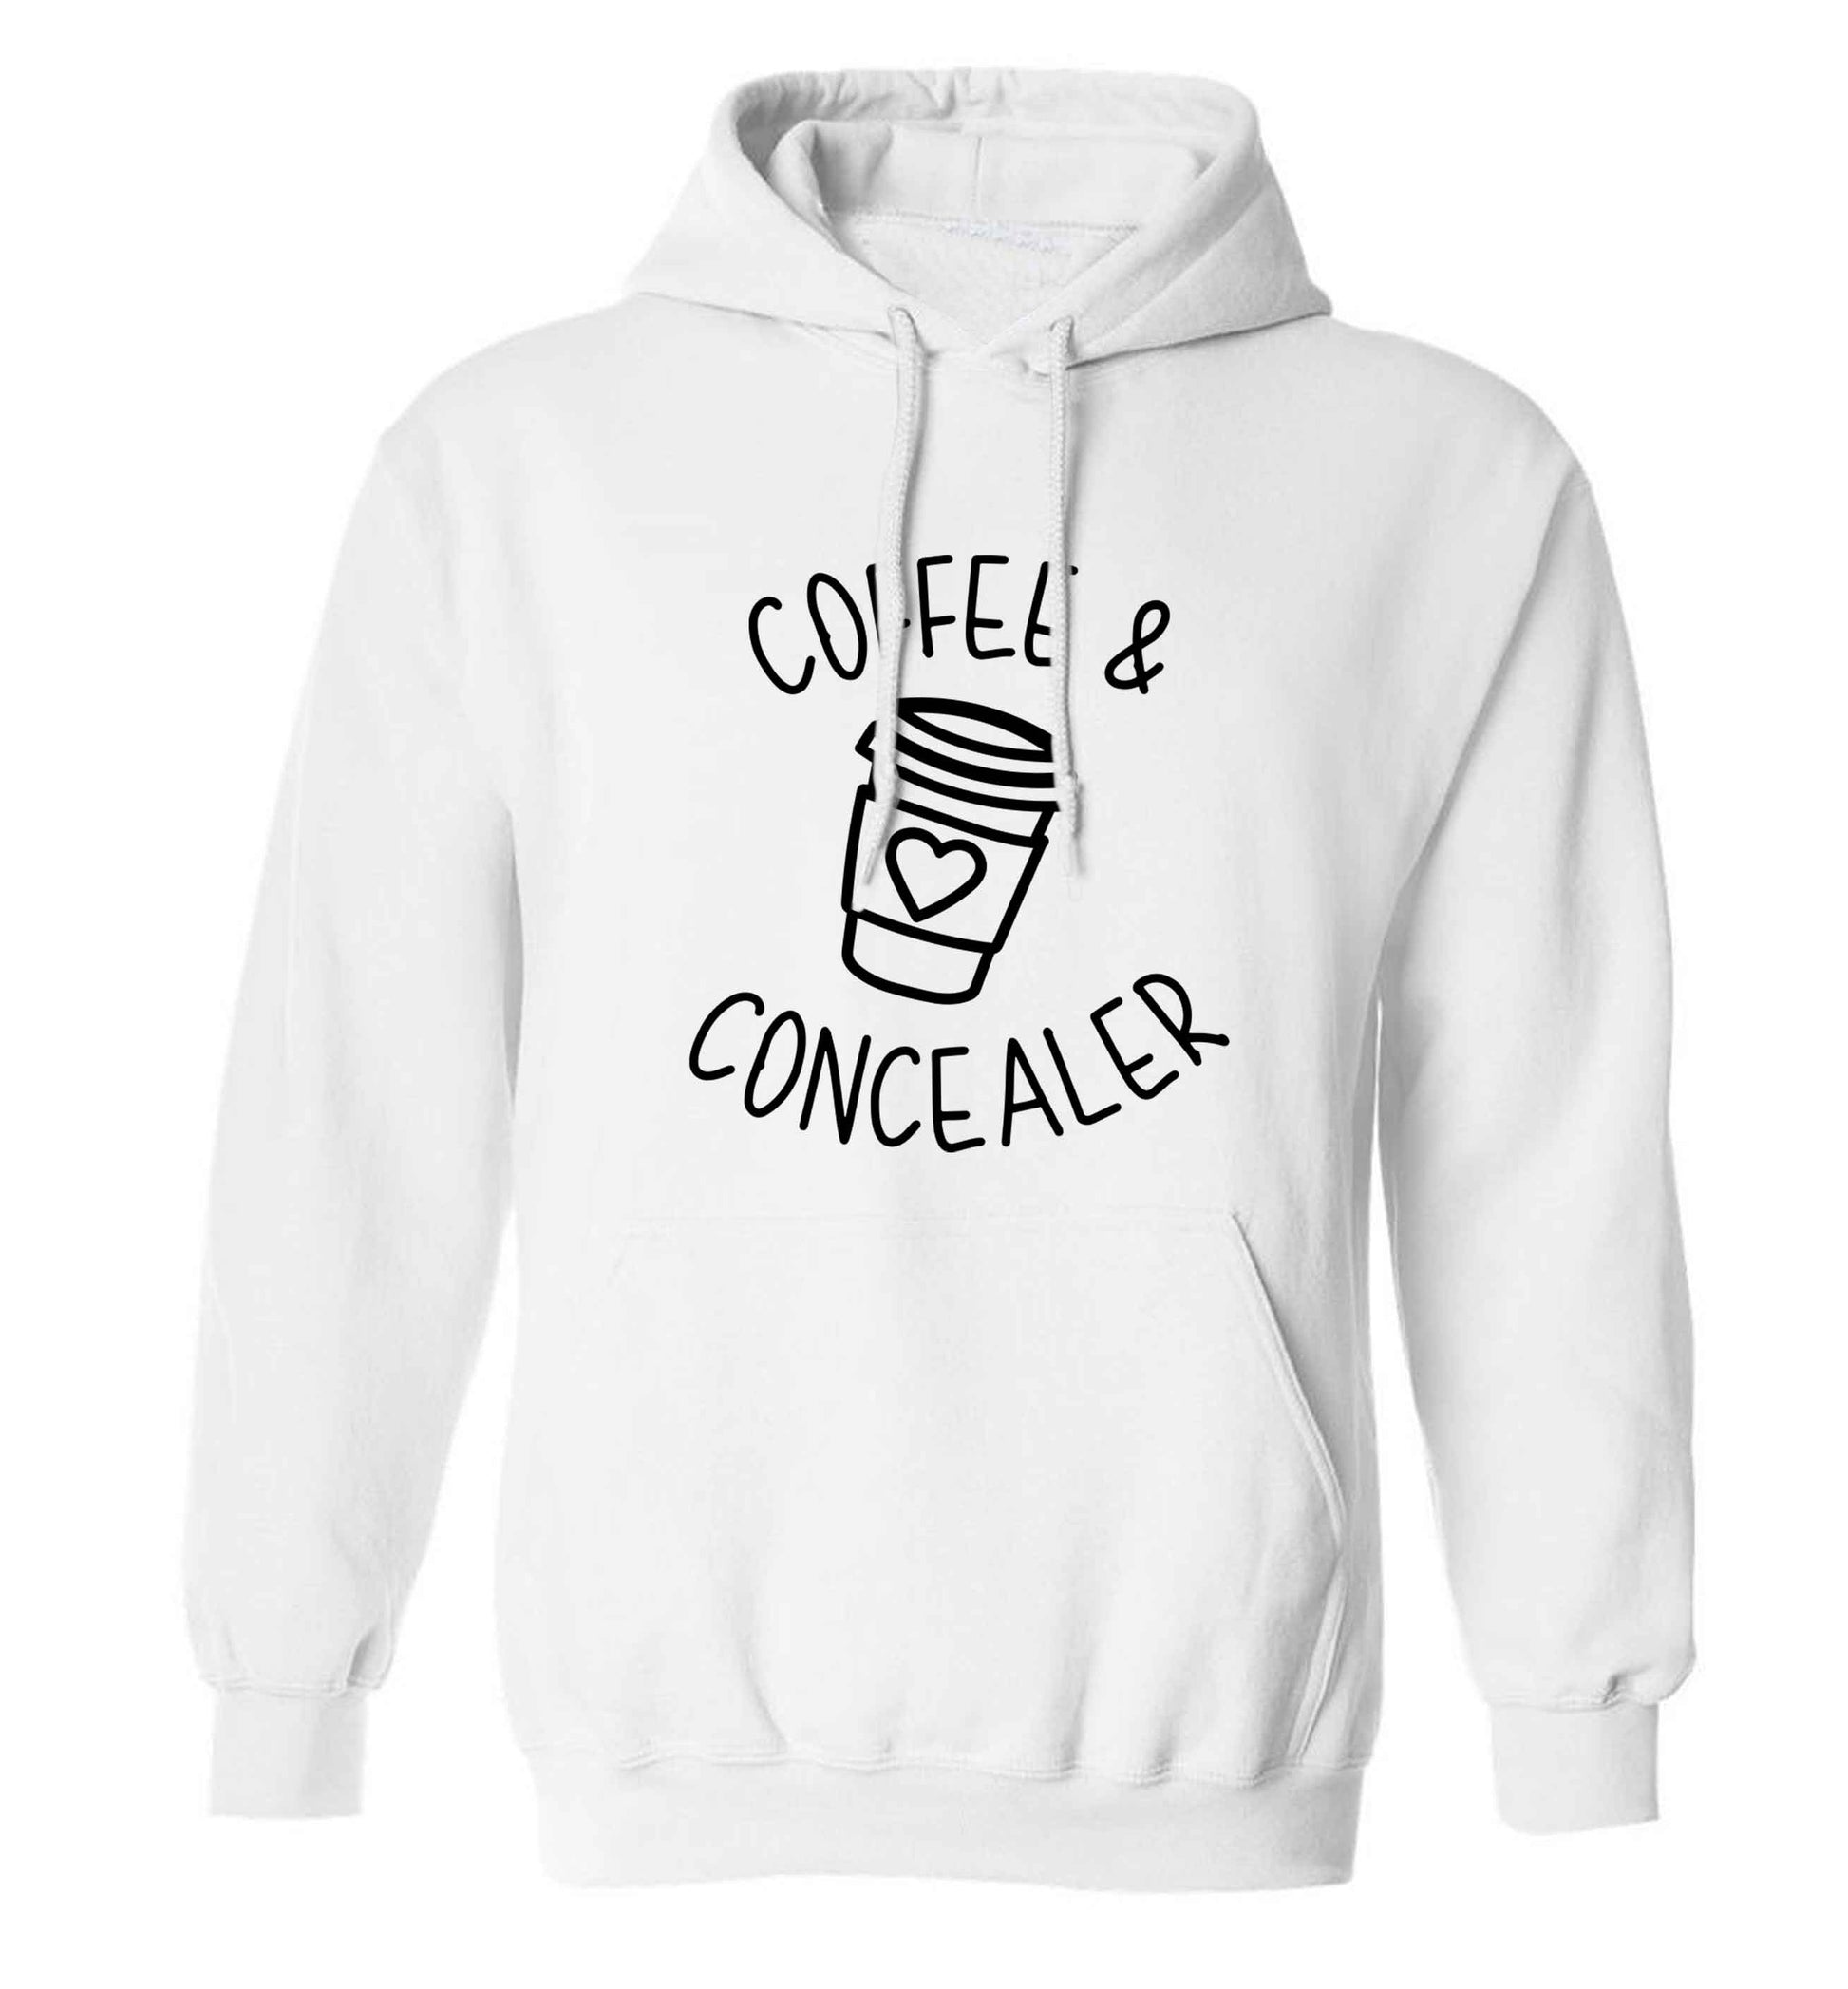 Coffee and concealer adults unisex white hoodie 2XL